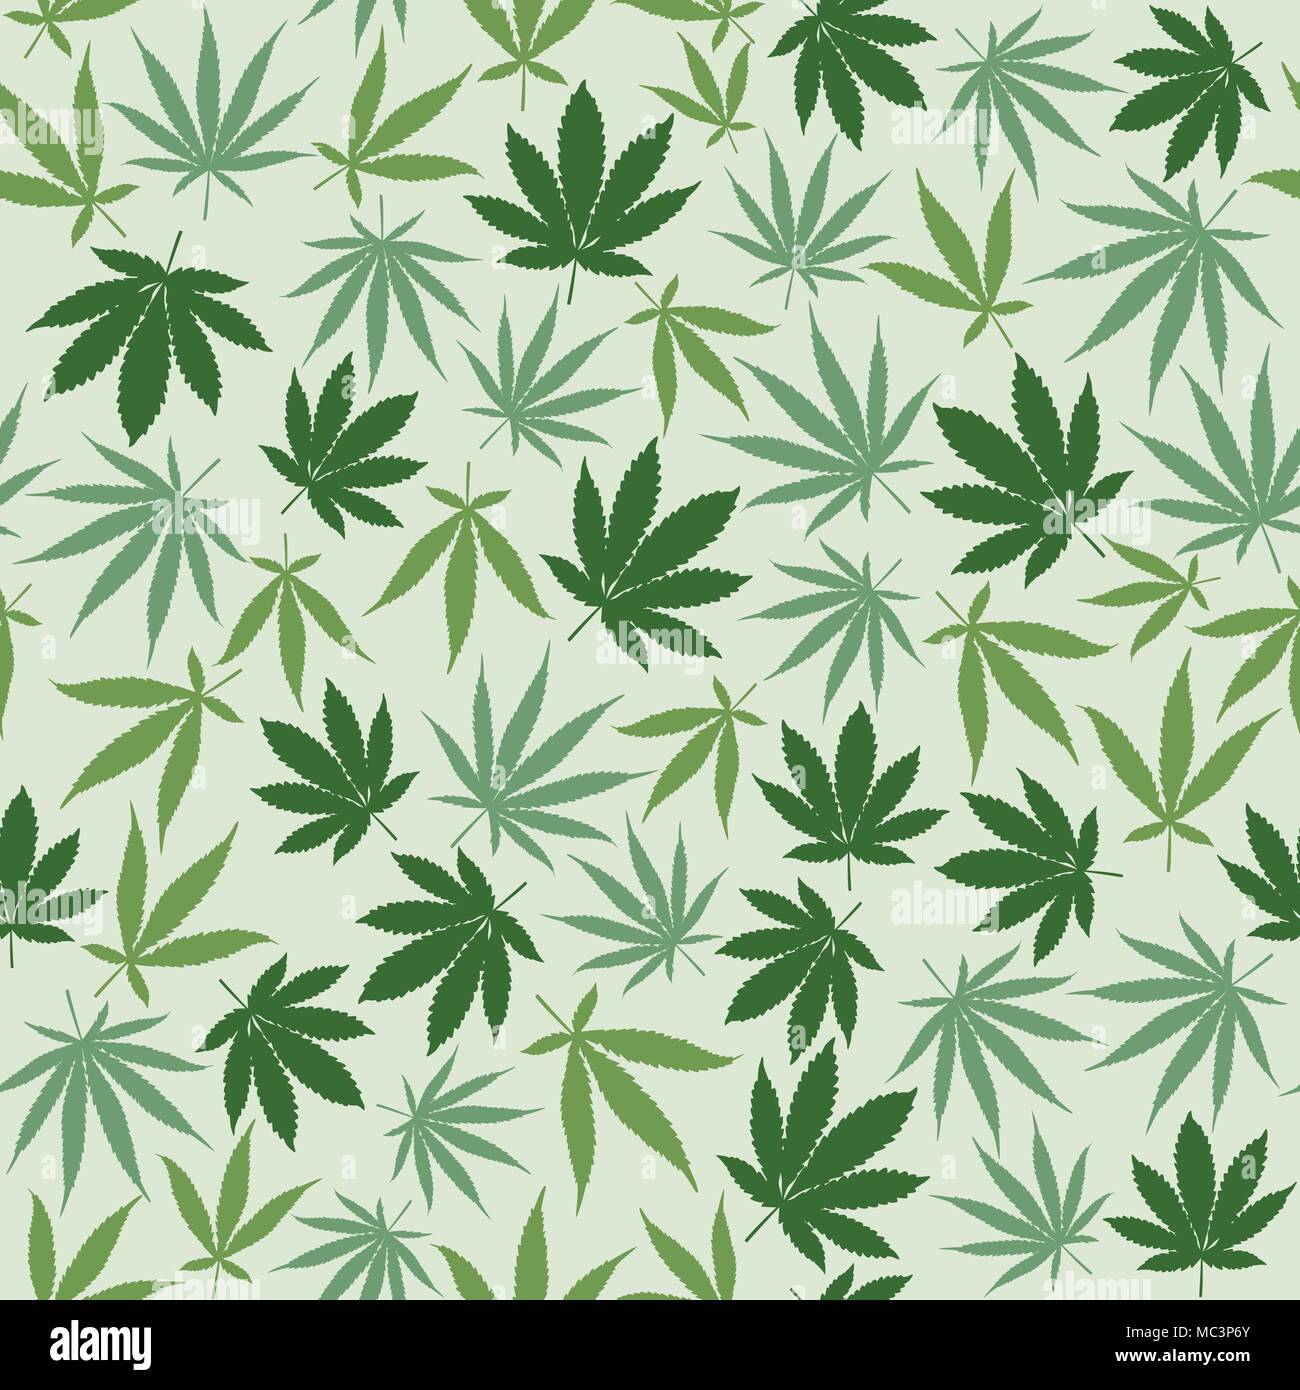 Hemp seamless pattern background with different leaves, herbal medicine and cannabis concept Stock Vector